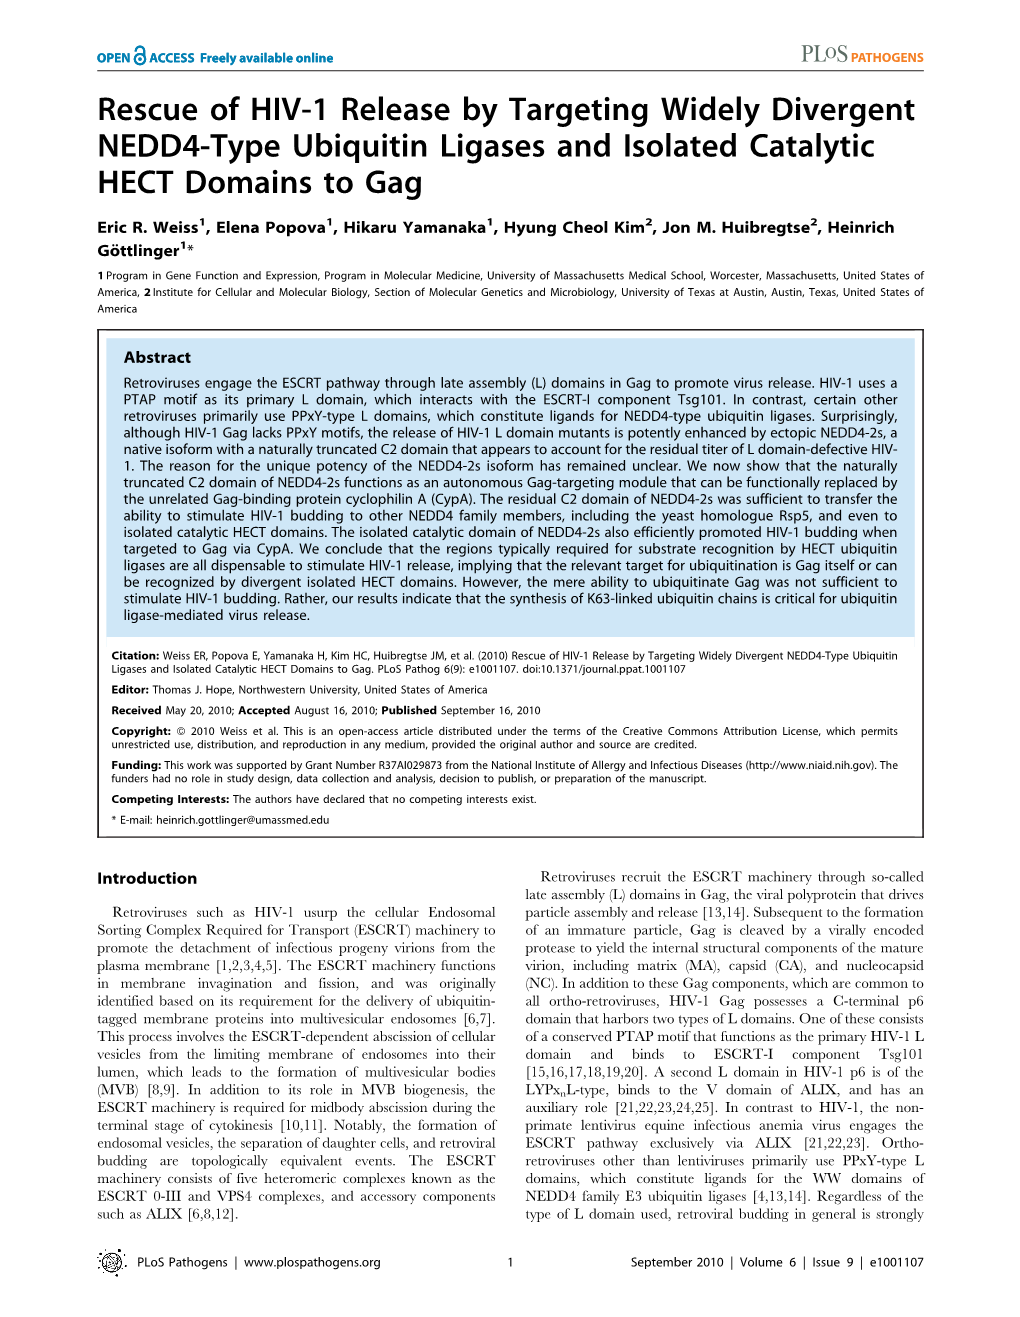 Rescue of HIV-1 Release by Targeting Widely Divergent NEDD4-Type Ubiquitin Ligases and Isolated Catalytic HECT Domains to Gag